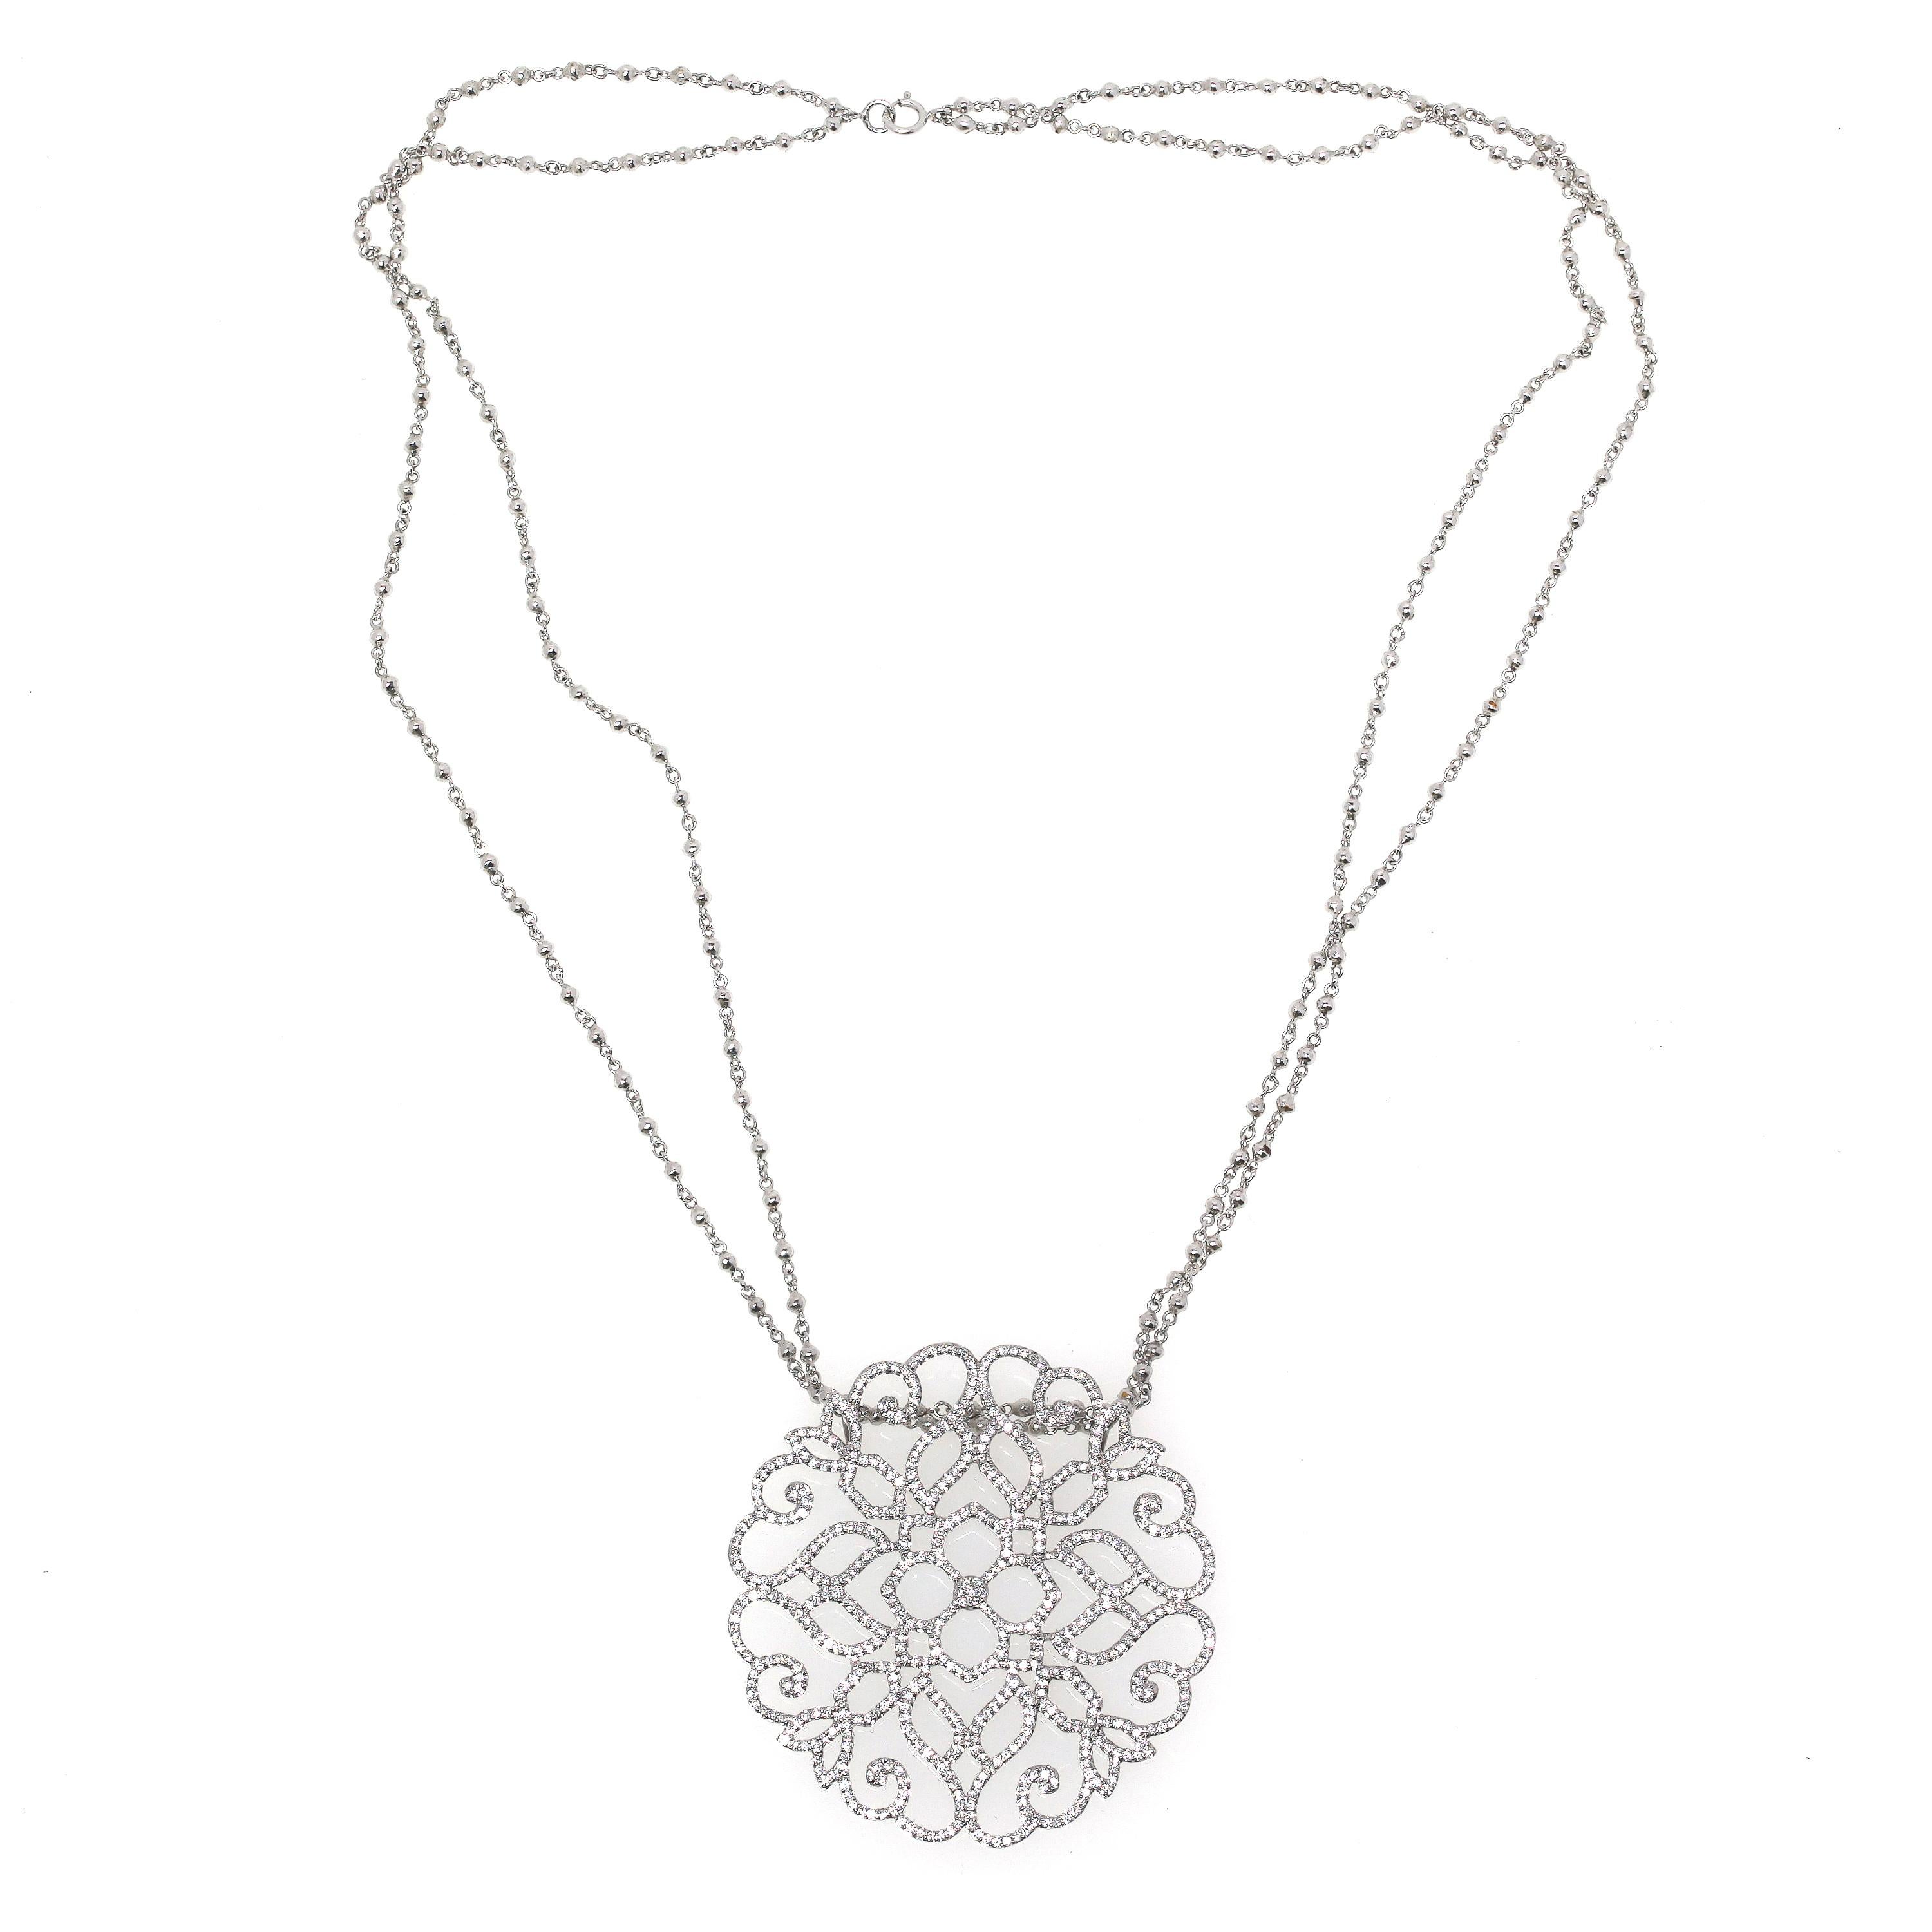 This gorgeous set has a great Gothic floral look featuring a diamond-encrusted drop pendant hanging from an 18K White Gold chain necklace. The pendant is set with genuine/natural diamonds in a flower design in white gold.

-Diamond 2.32 carat 